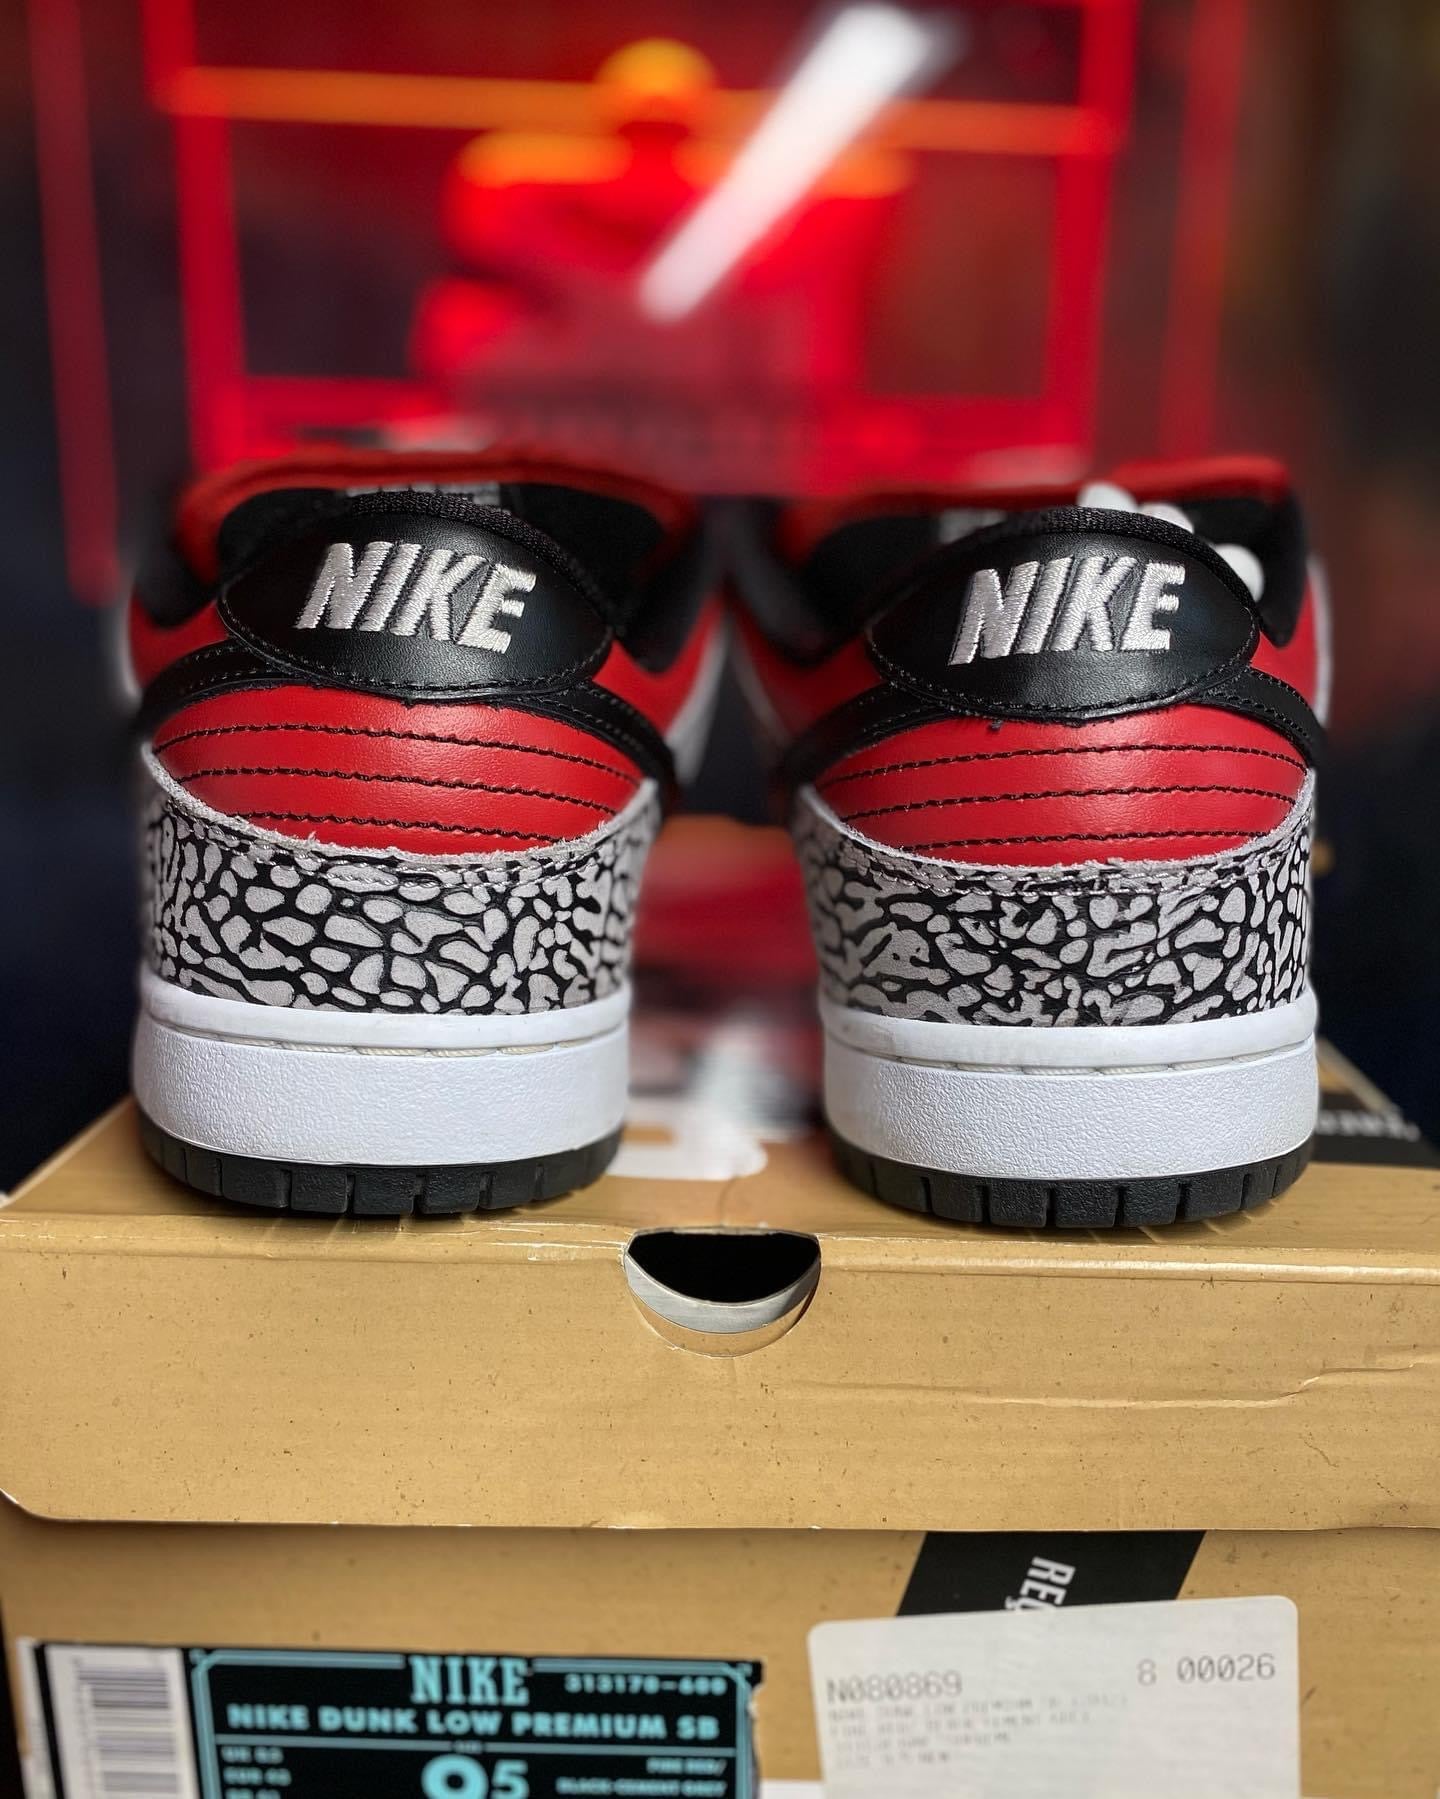 Nike SB Dunk Low 'Supreme Red Cement' 2012 WORN ONCE